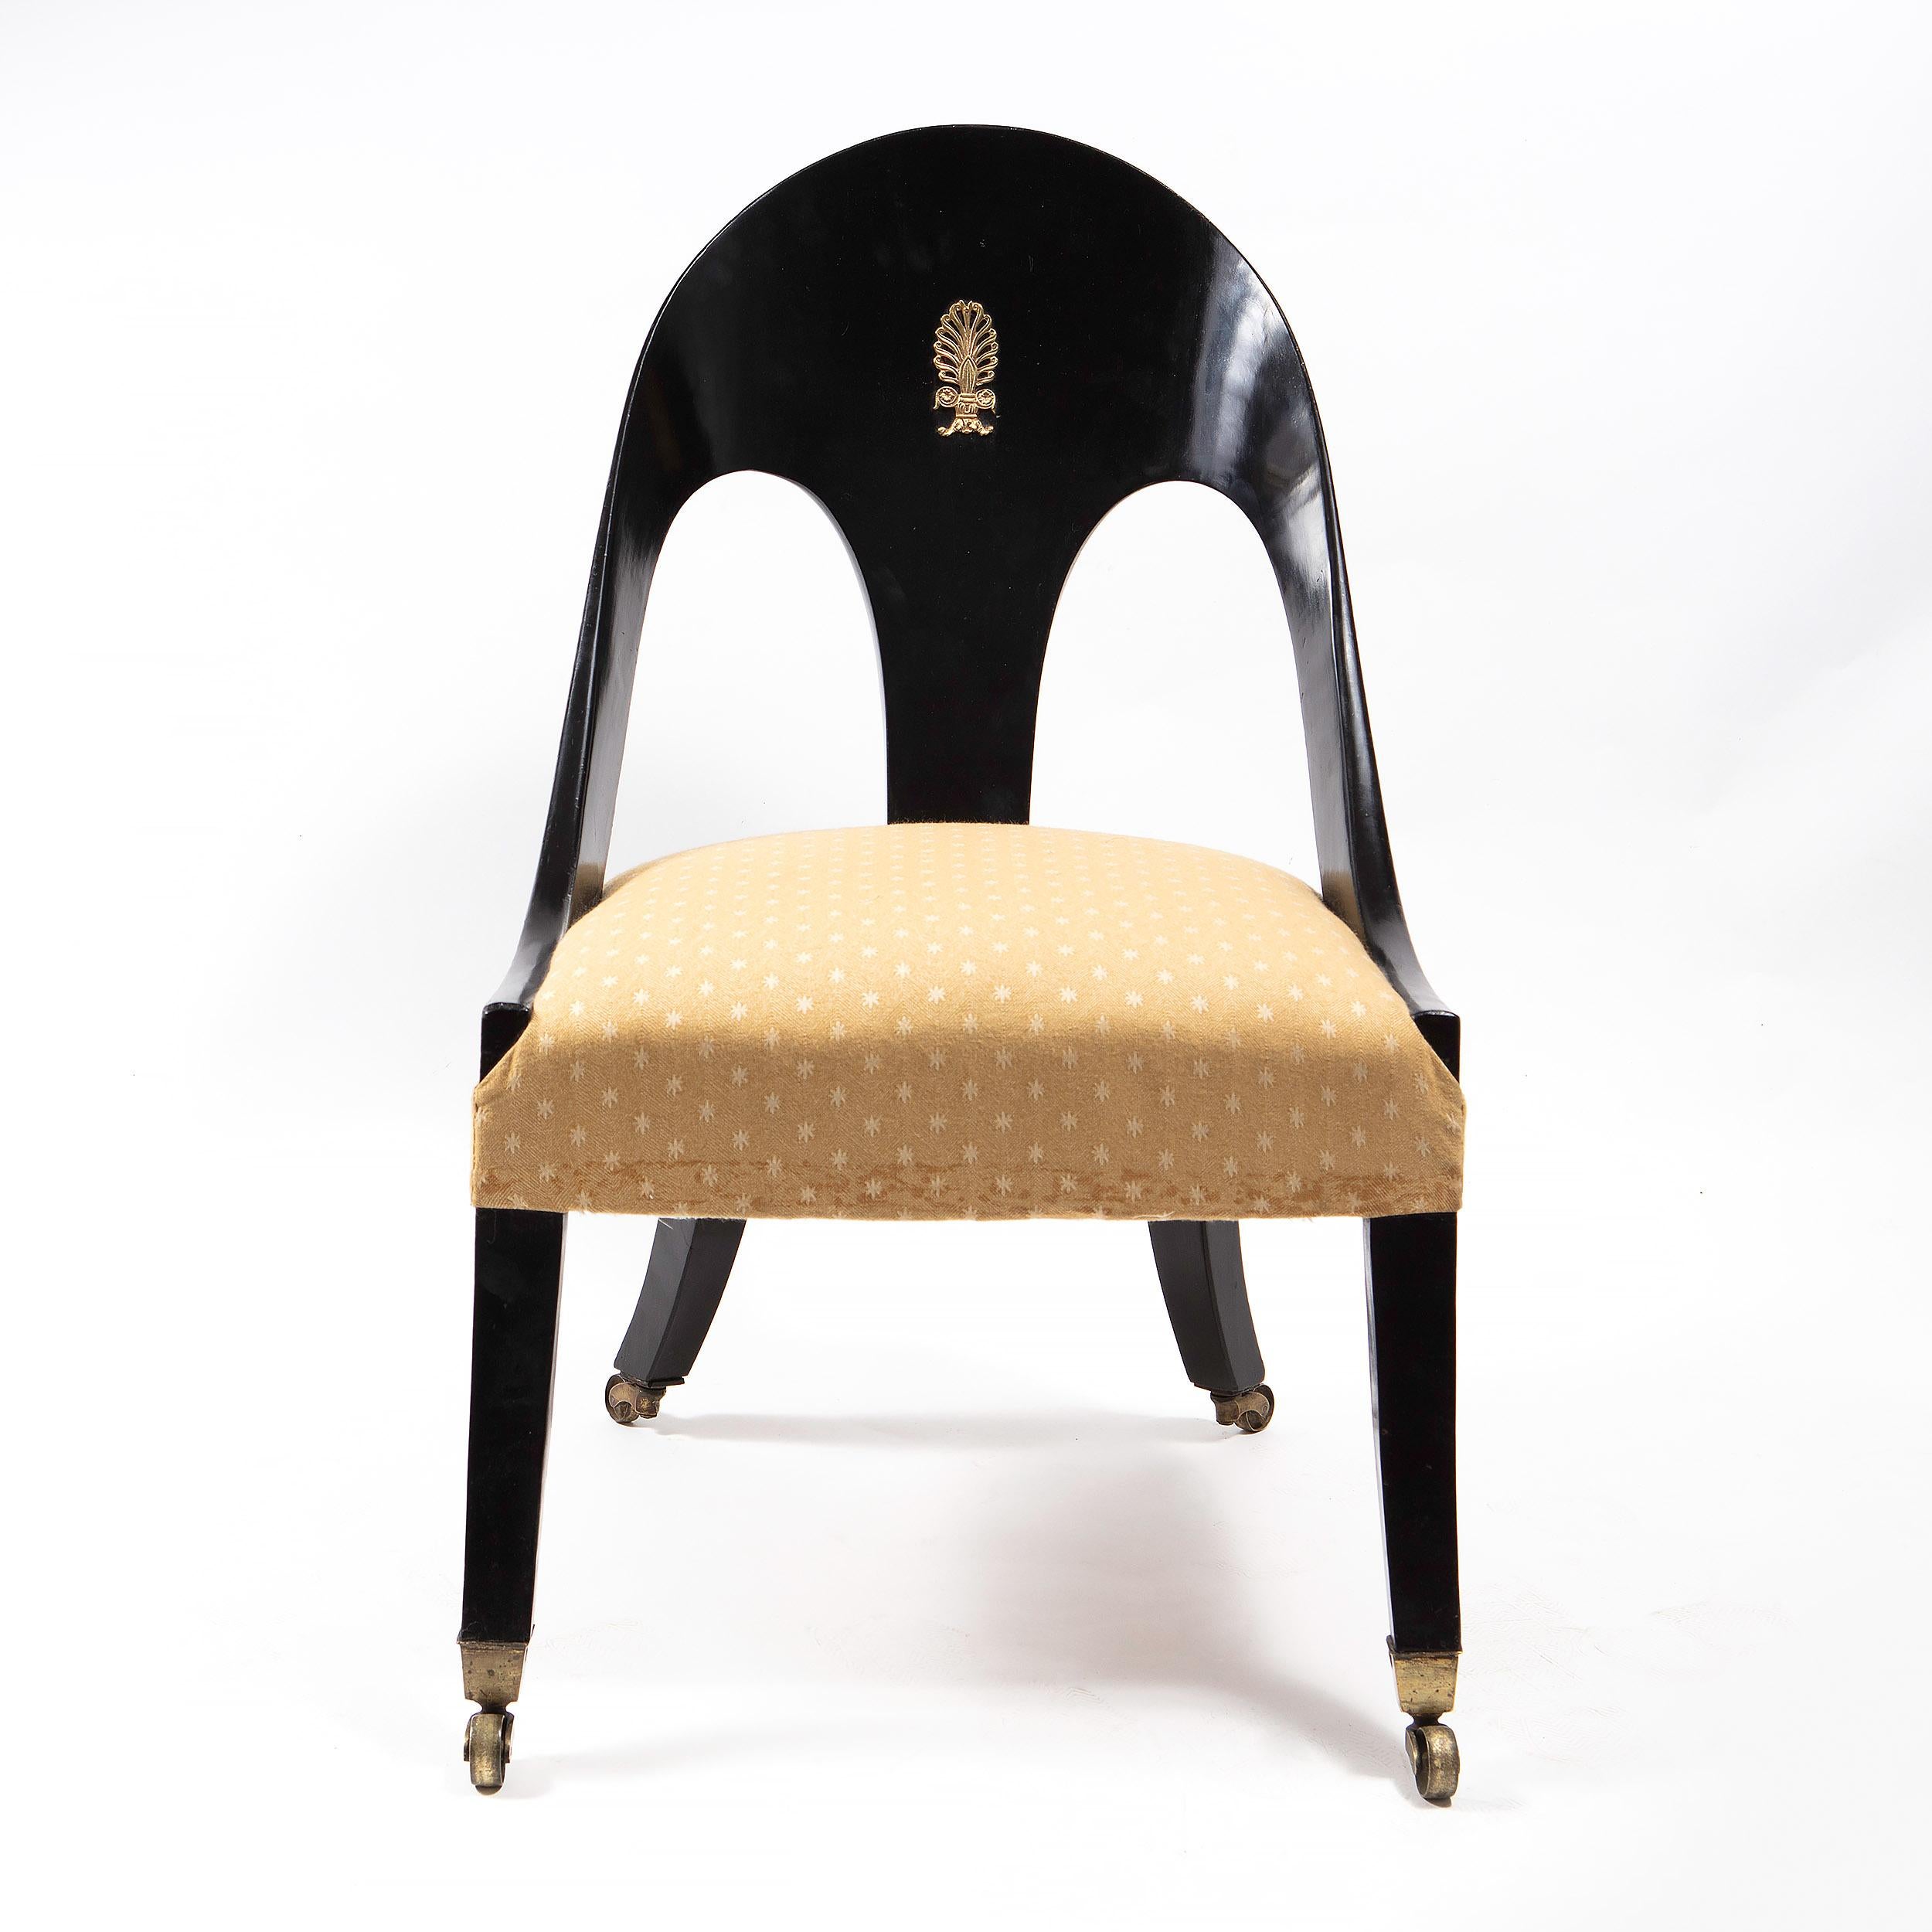 Regency Black Lacquer Spoonback Chair In Good Condition In London, by appointment only